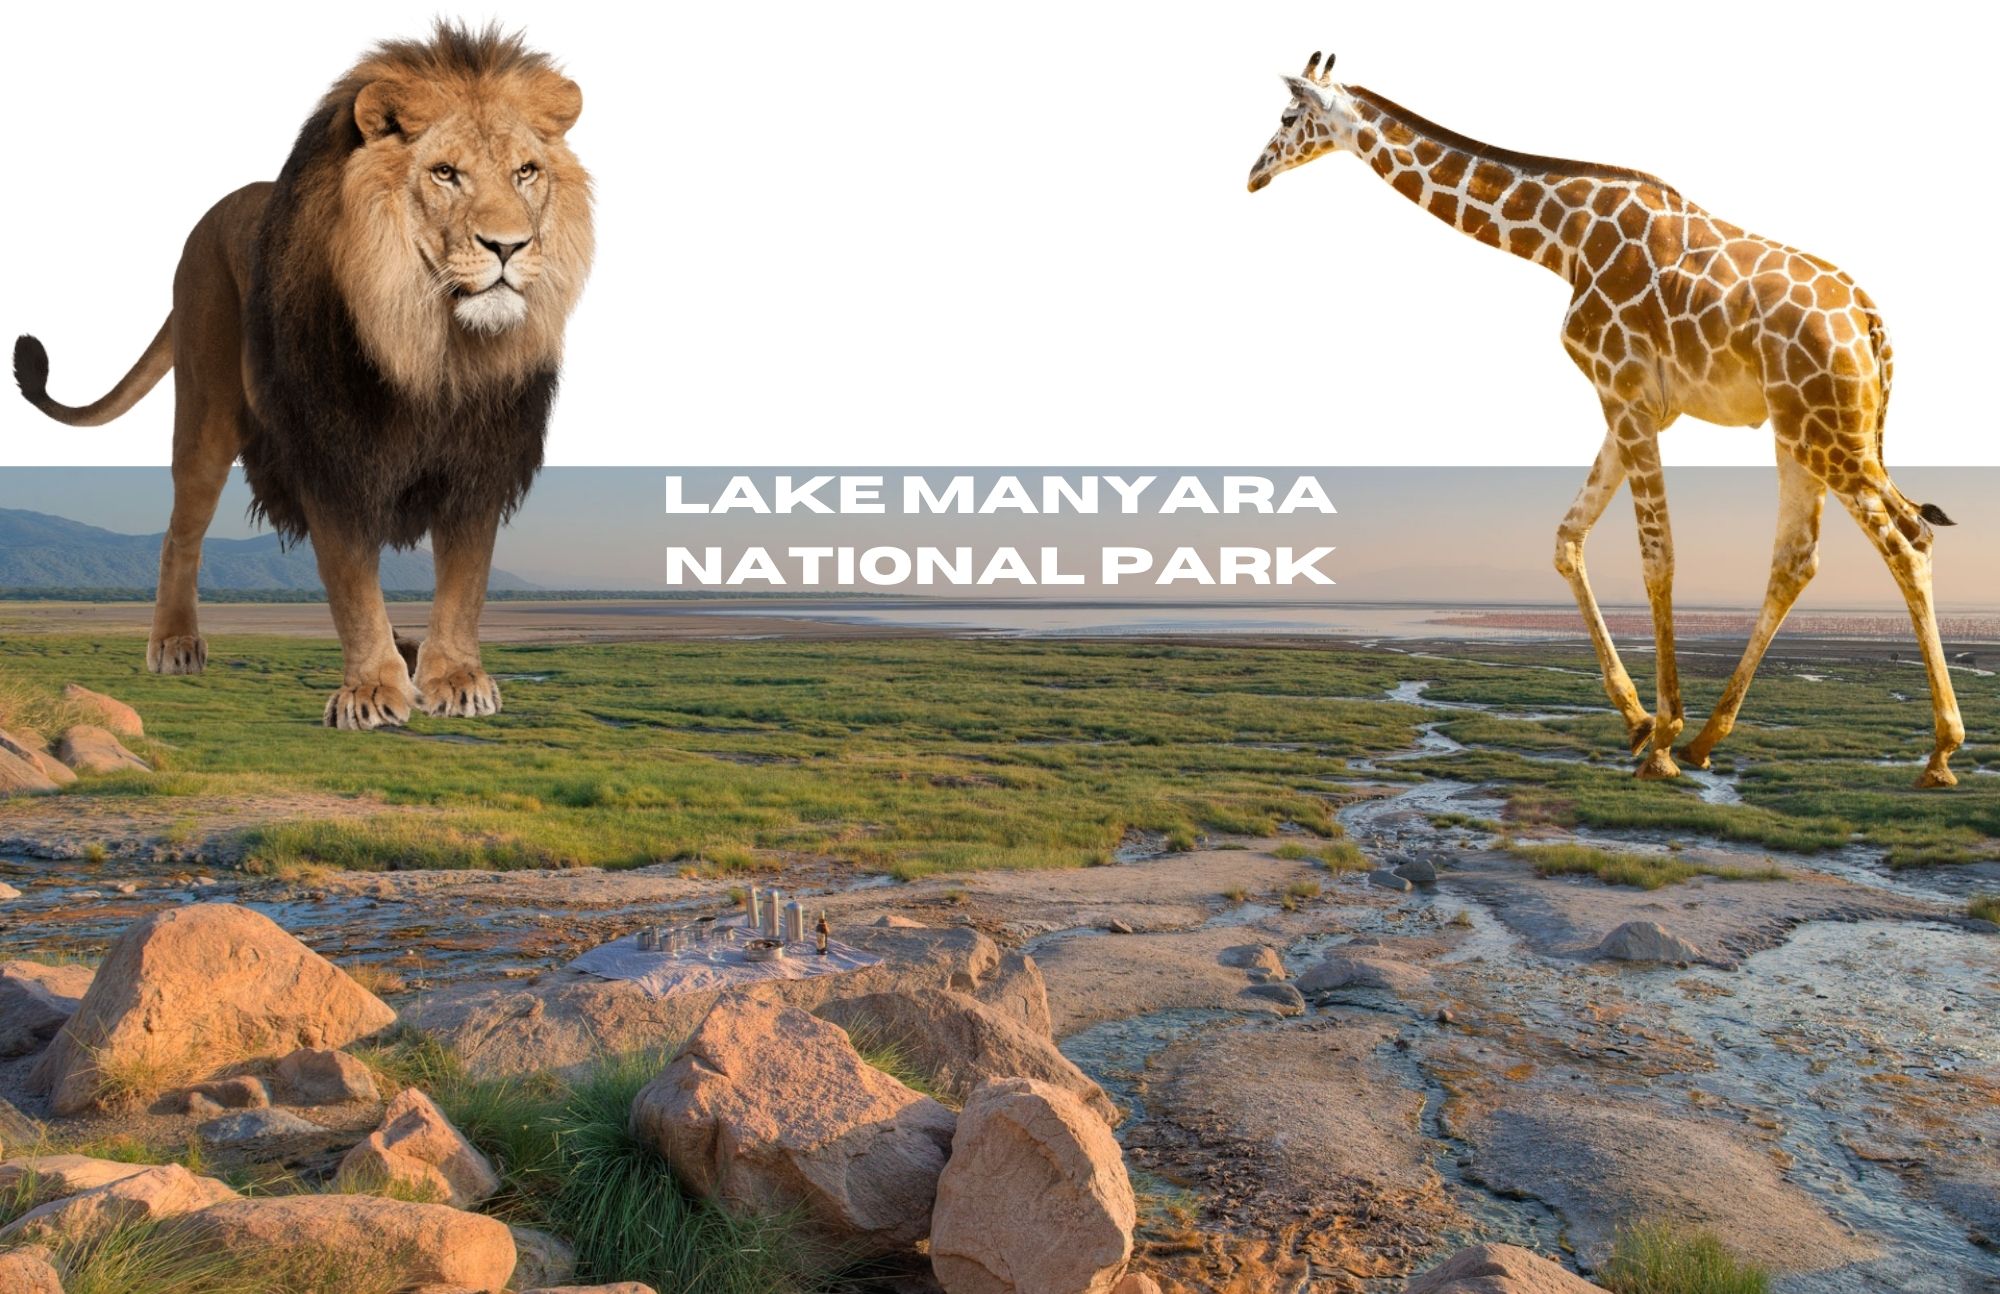 Lake Manyara National Park, with large rocks on the ground and a photograph of a lion and a giraffe